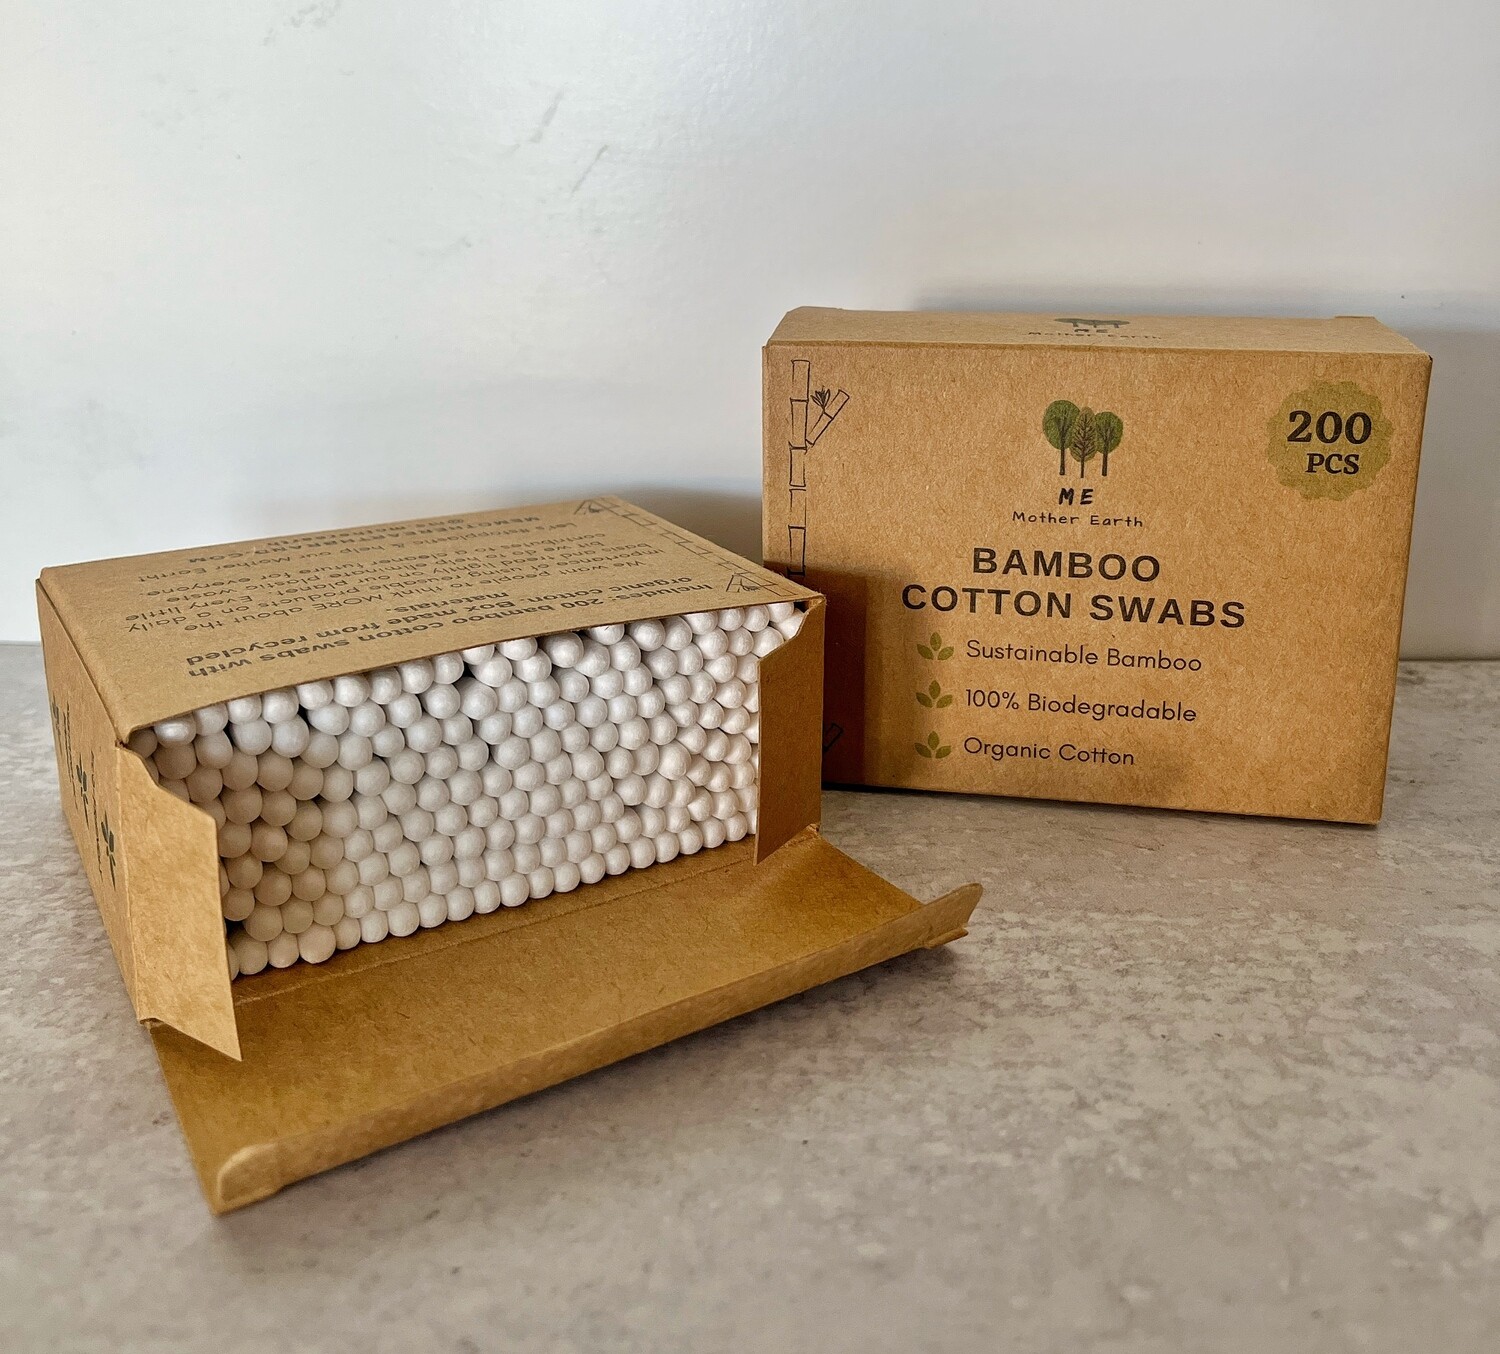 Bamboo Cotton Swabs, 200ct. - Me Mother Earth